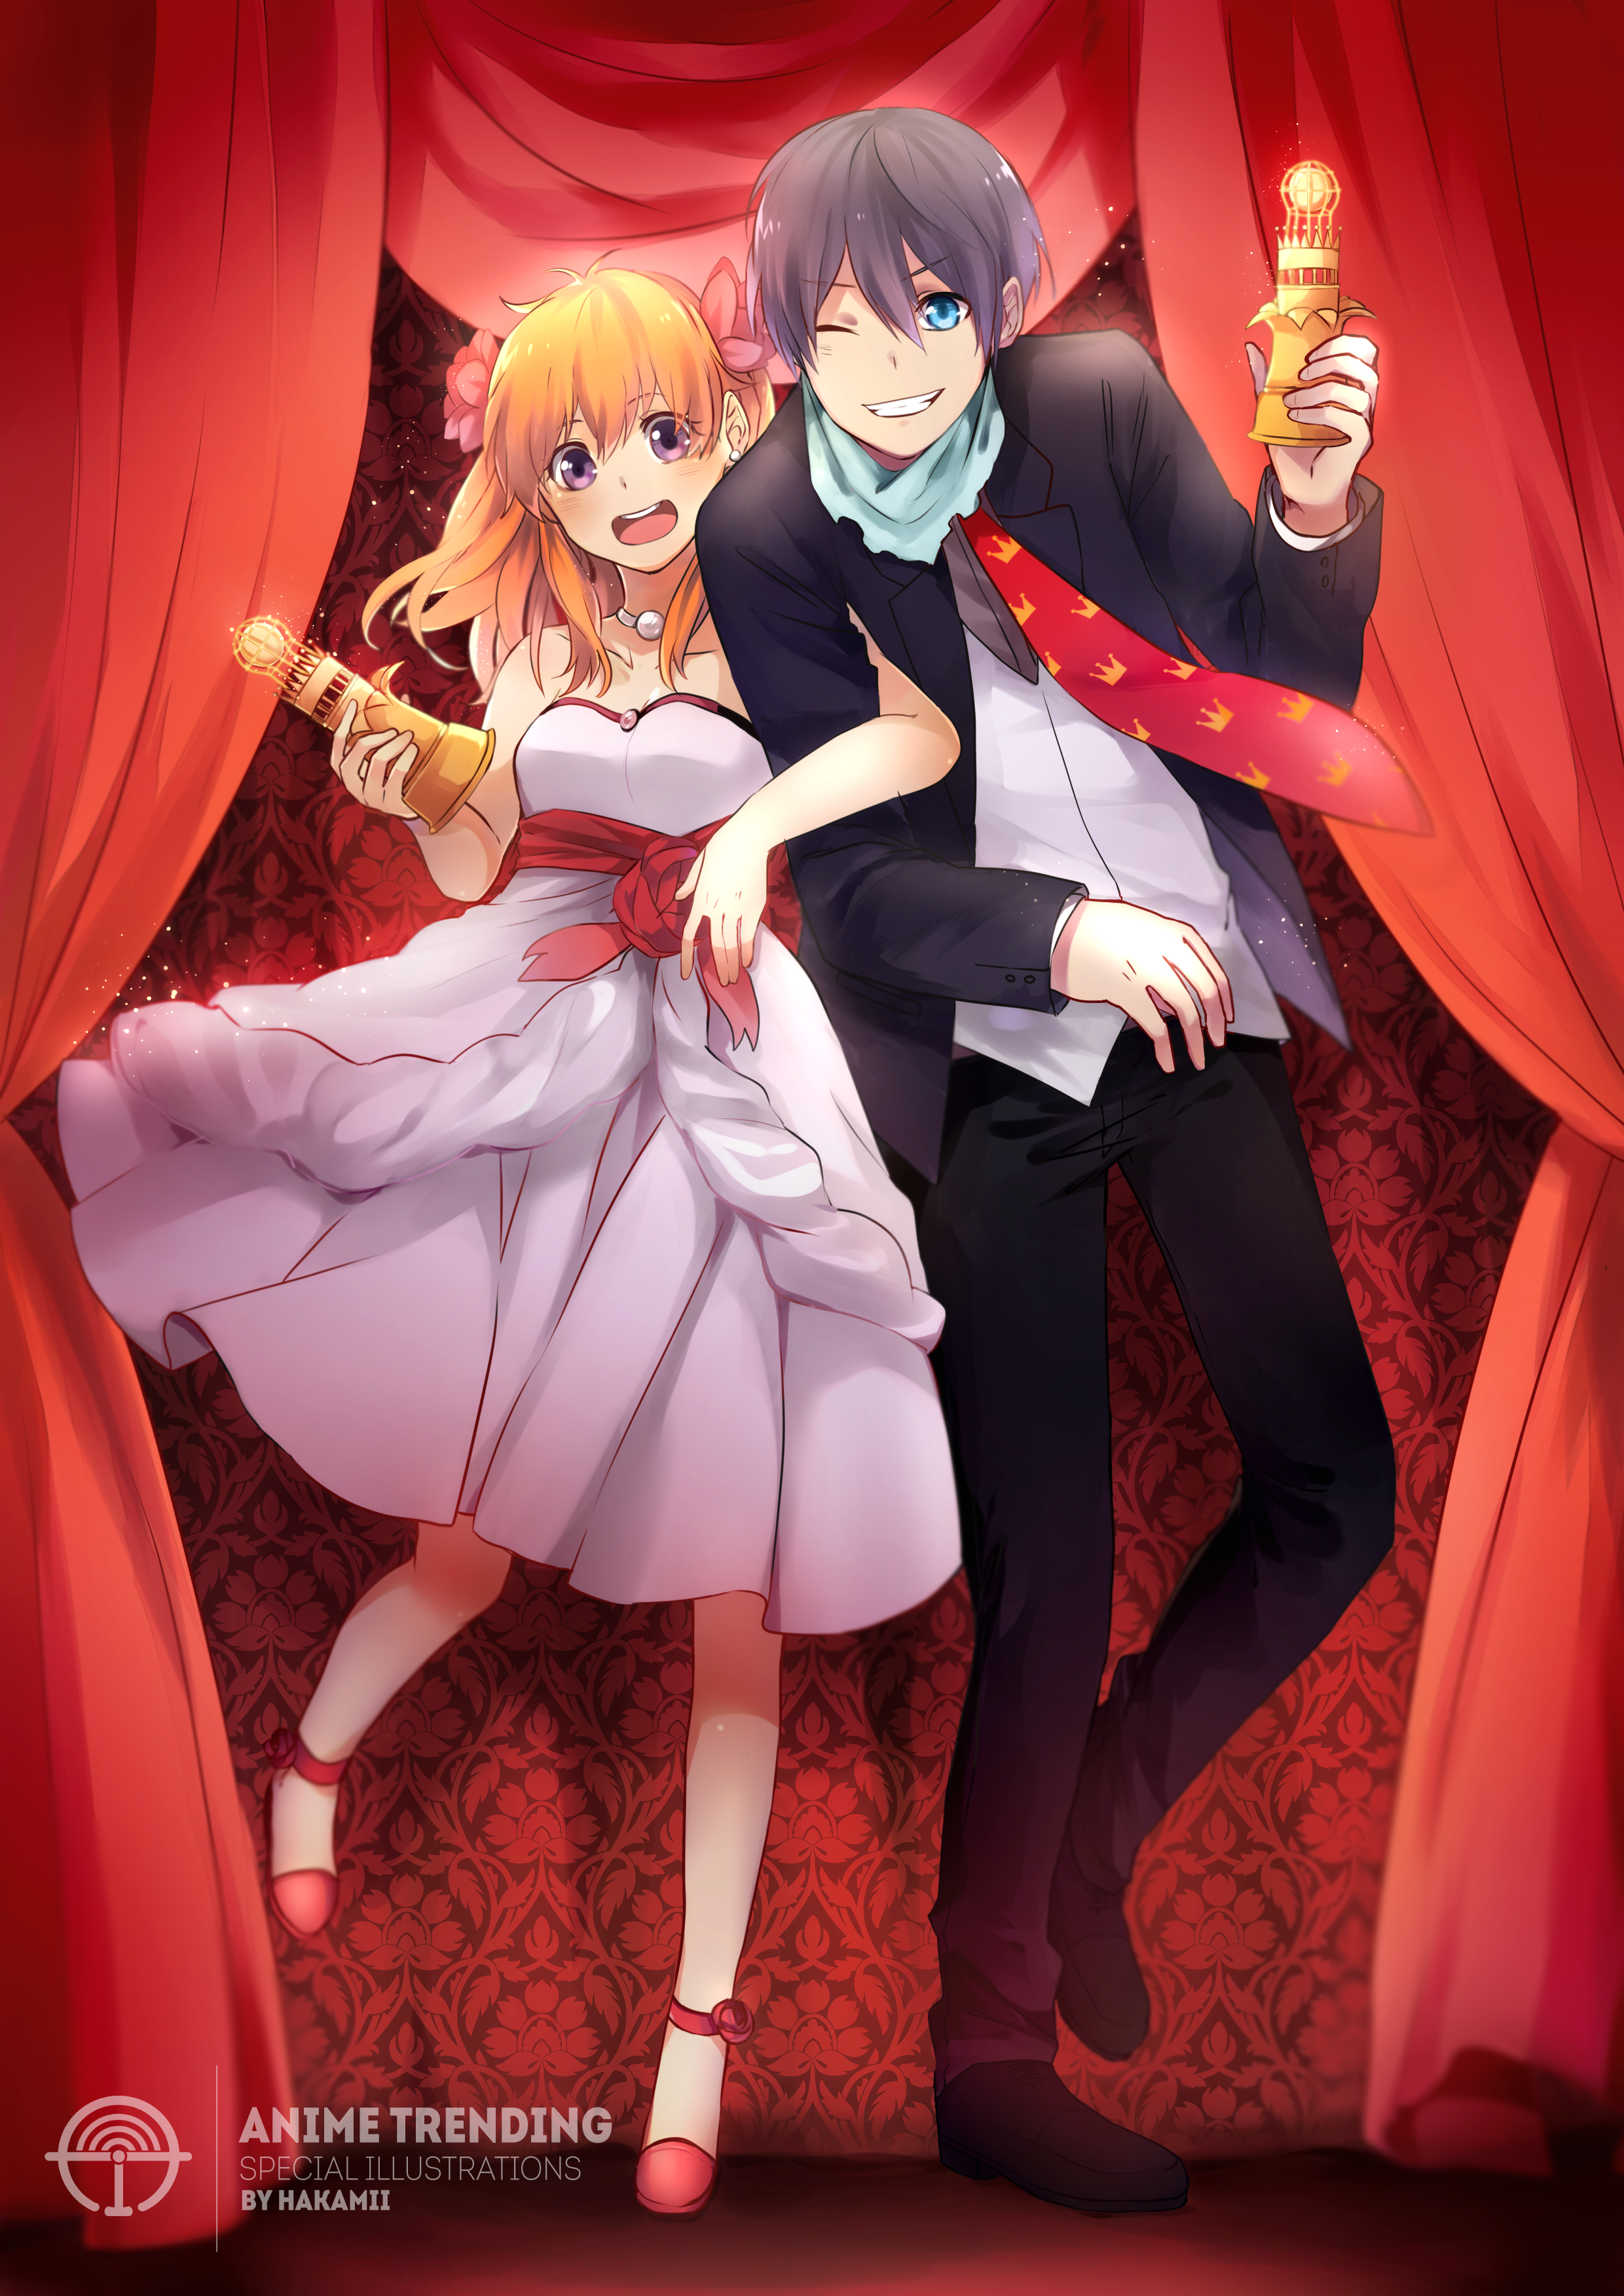 Yato, Chiyo hailed as first-ever King and Queen of AT!